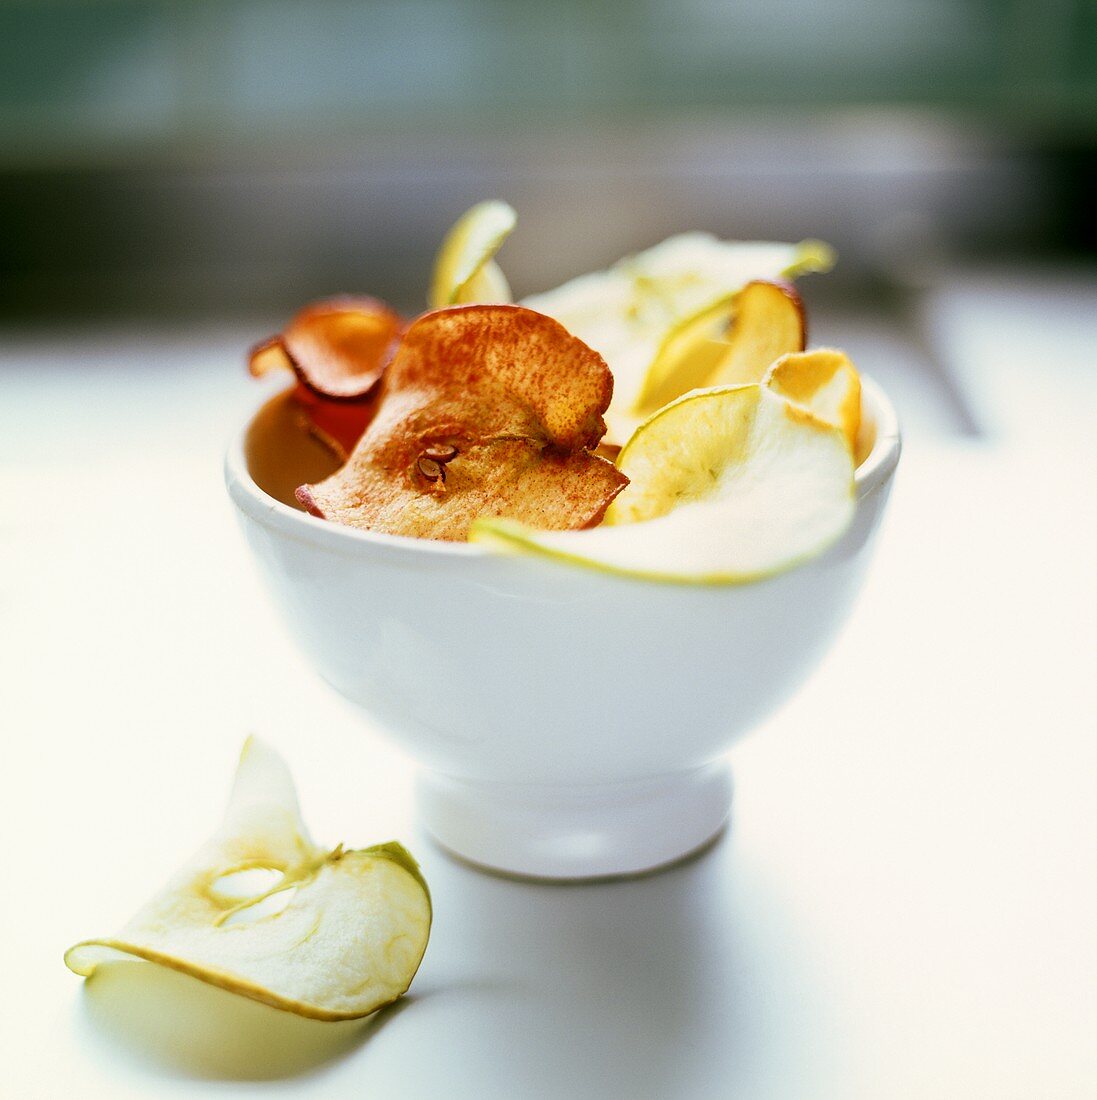 Apple crisps (dried apple slices) in a bowl